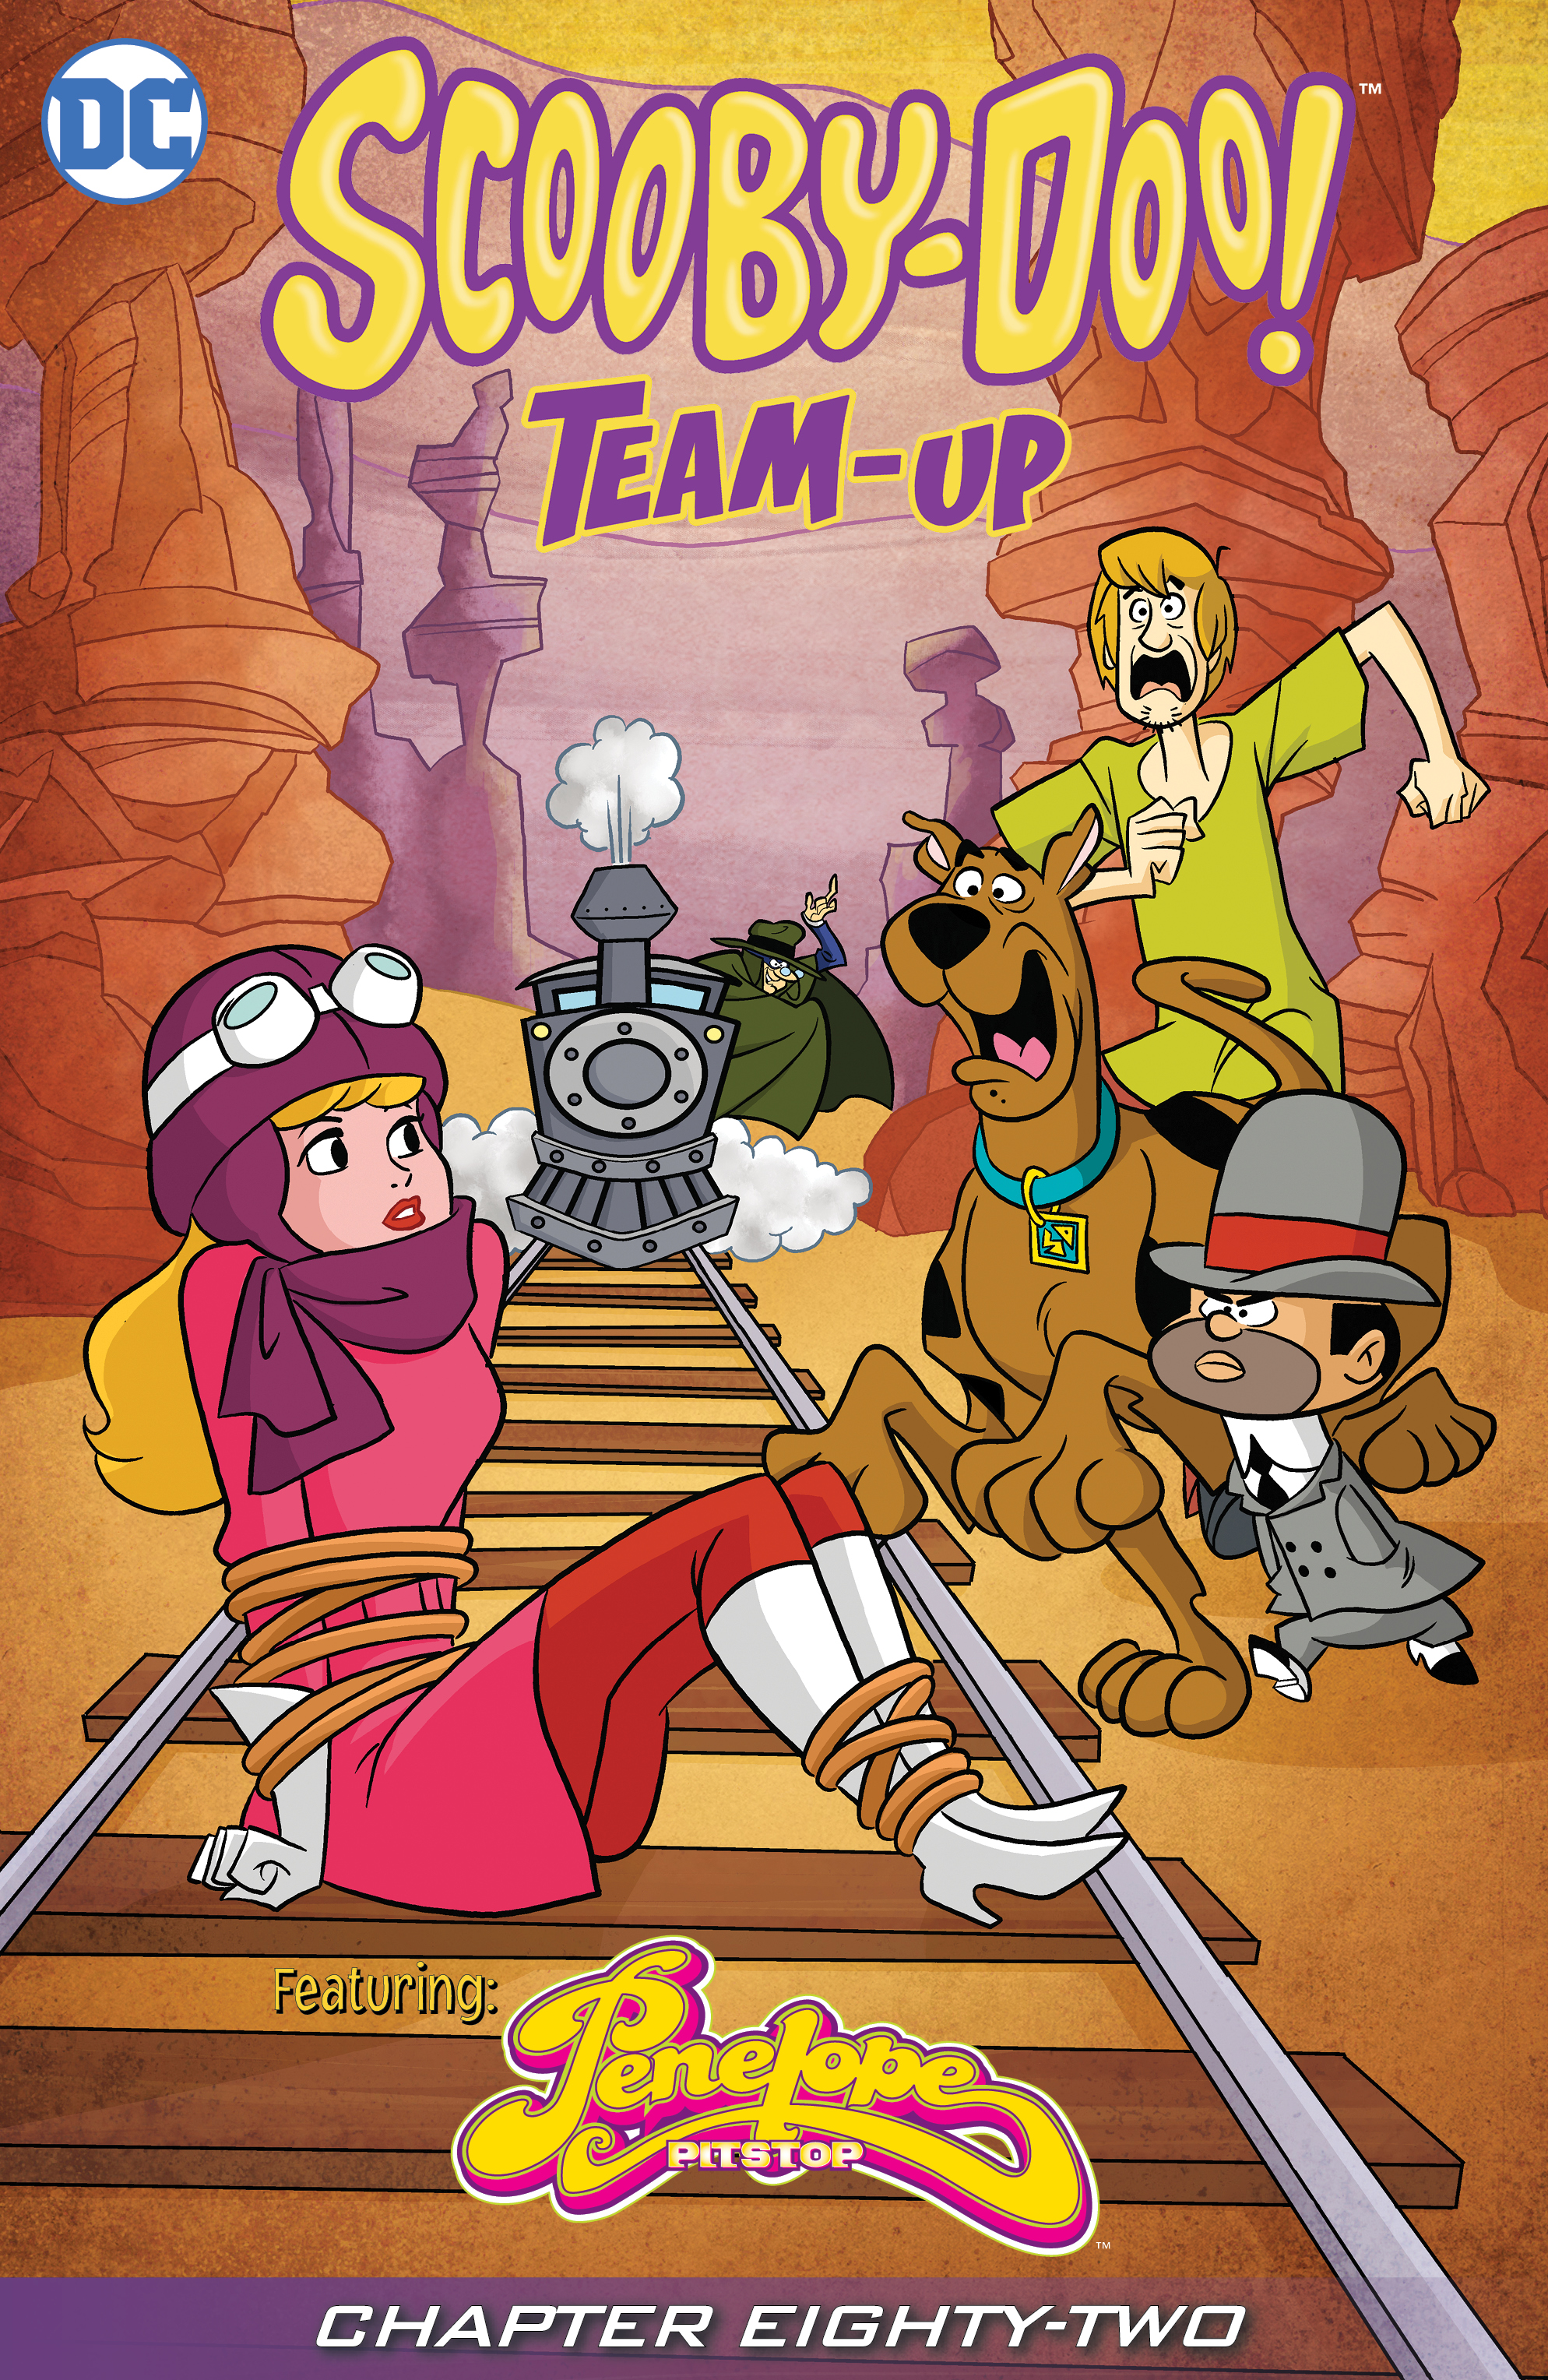 Scooby-Doo Team-Up #82 preview images